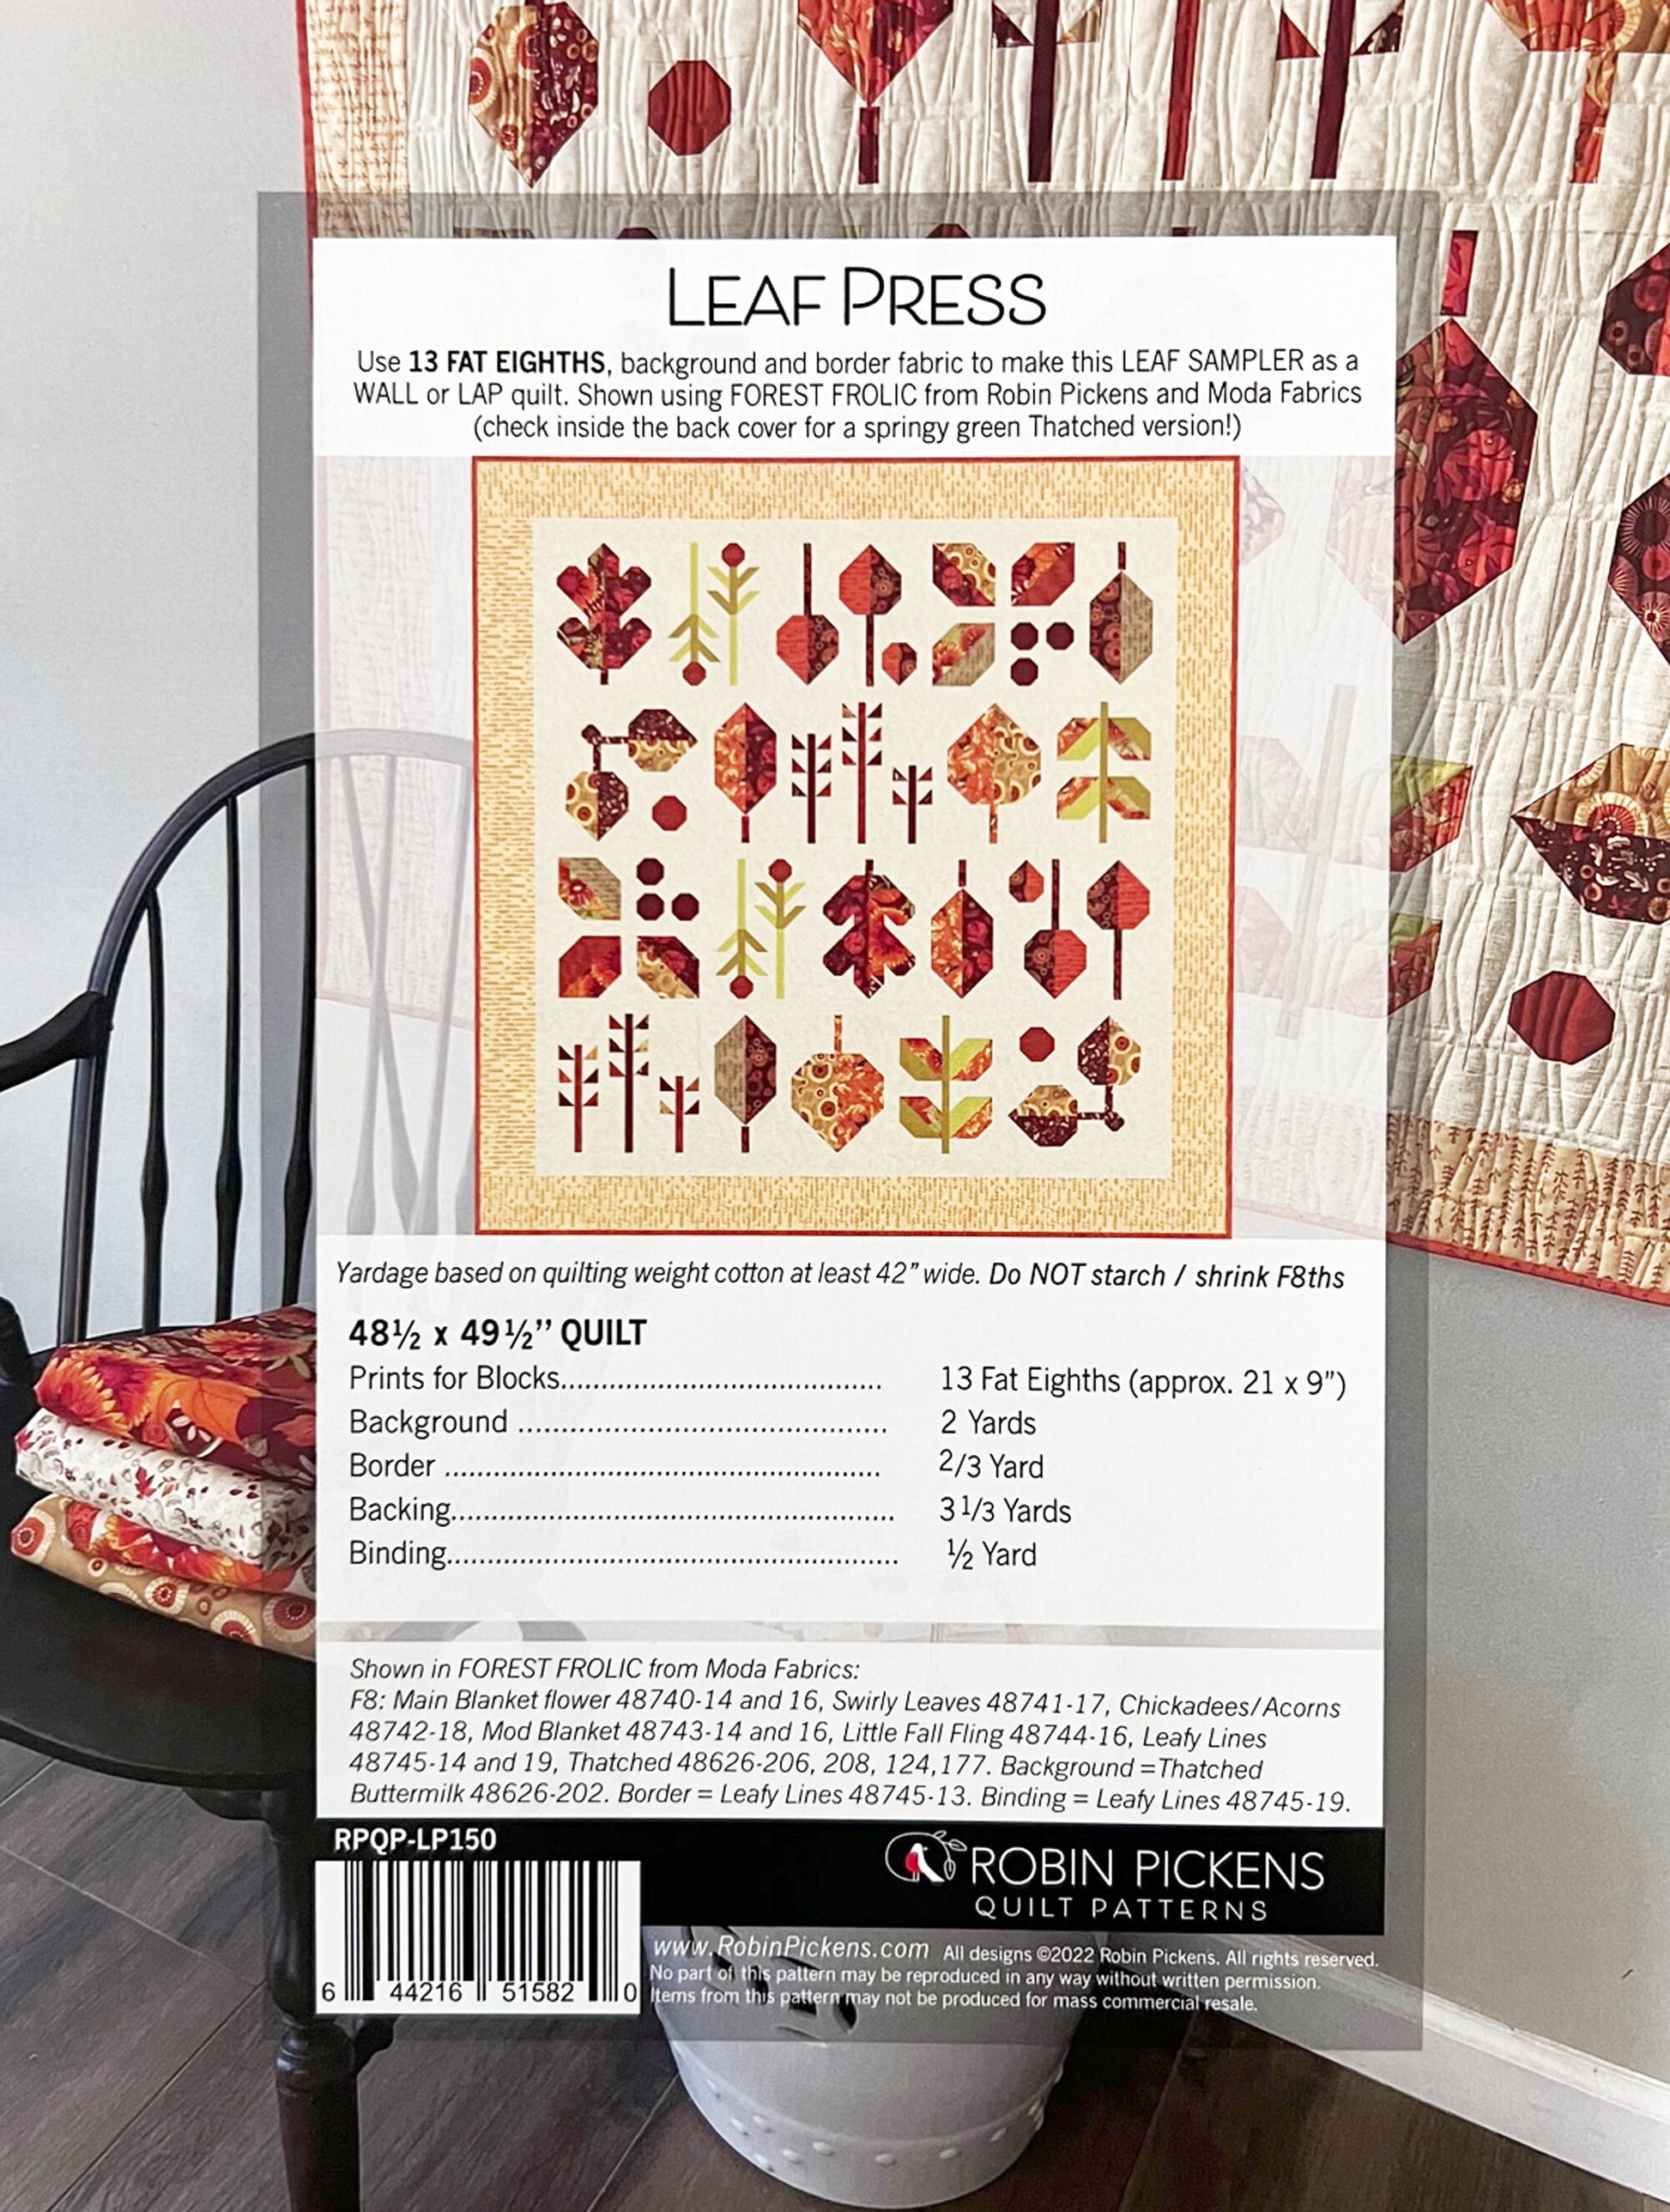 Leaf Press Quilt Pattern, Robin Pickens RPQP-LP150, Fat Eighths F8 Friendly, Autumn Fall Leaves Square Lap Throw Baby Wall Quilt Pattern